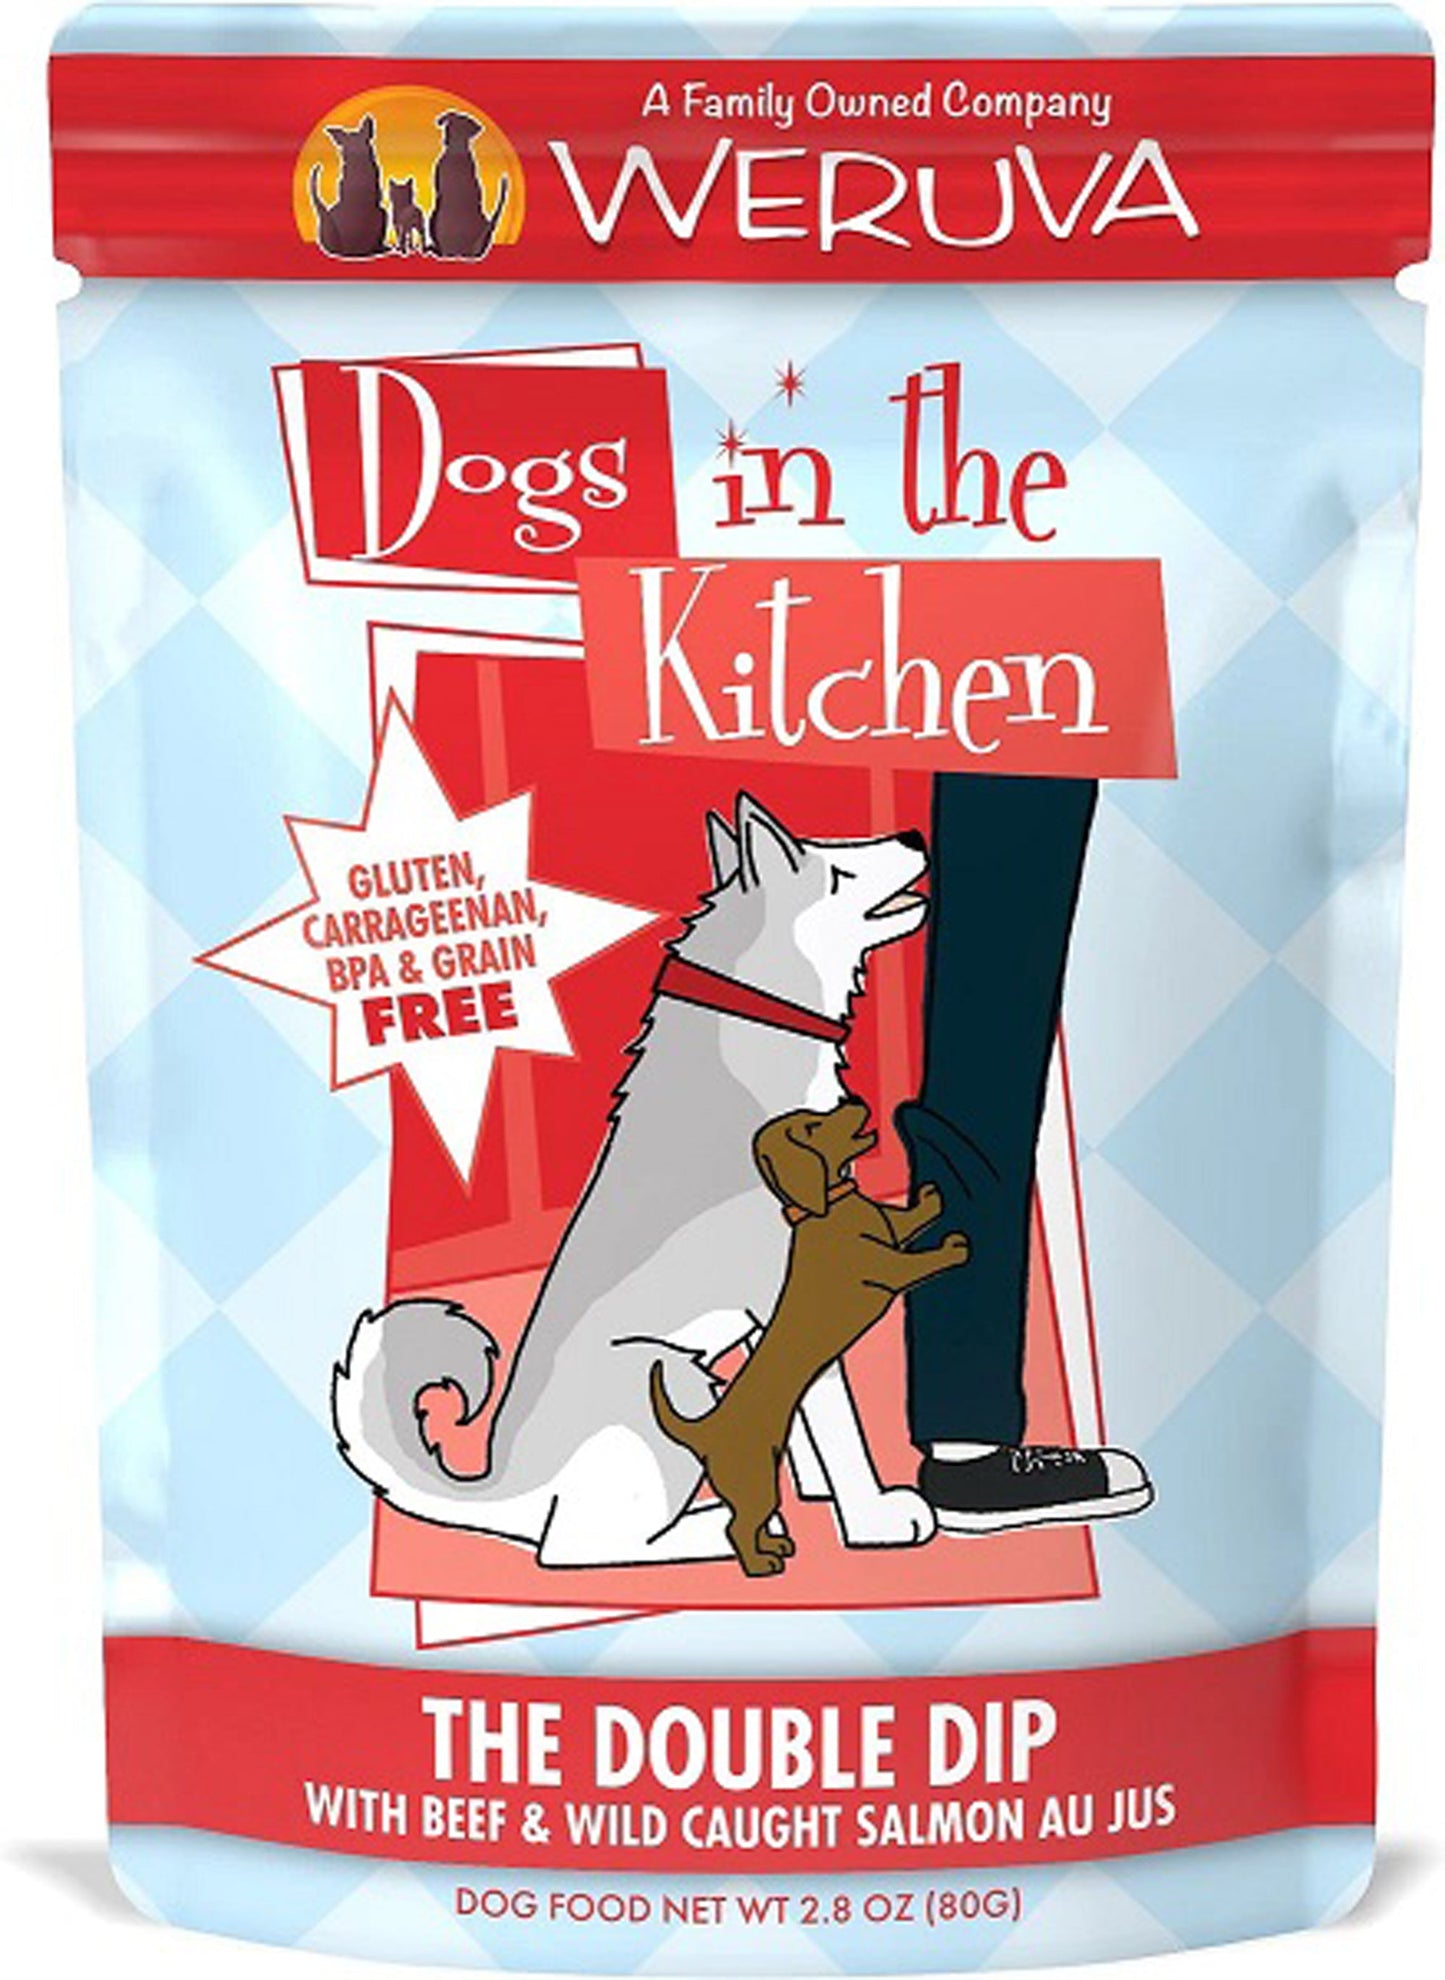 Dogs In The Kitchen Dog The Double Dip With Beef & Wild-Caught Salmon Au Jus 2.8oz. Pouch (Case of 12)